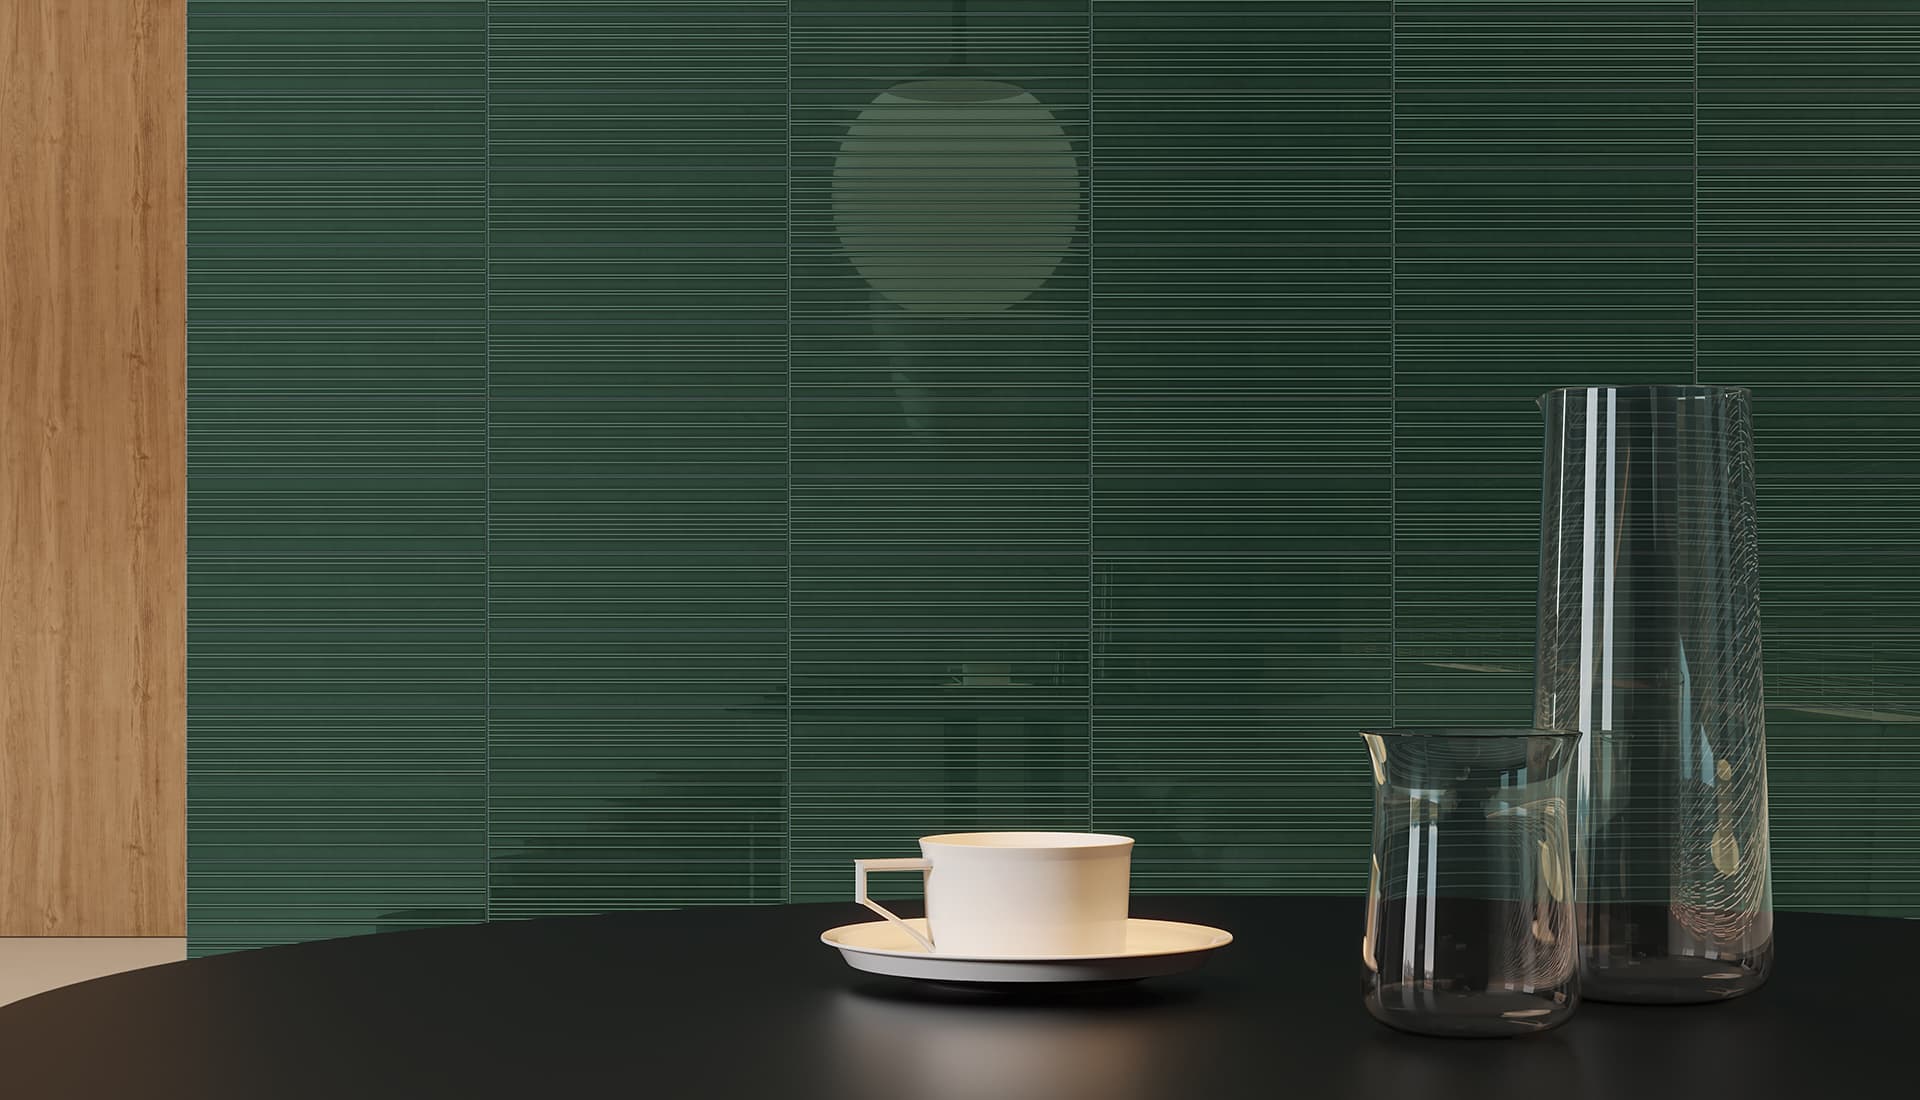 3 x 12 in / 7.5 x 30 cm Geometra Divide Emerald Glossy Pressed Tile